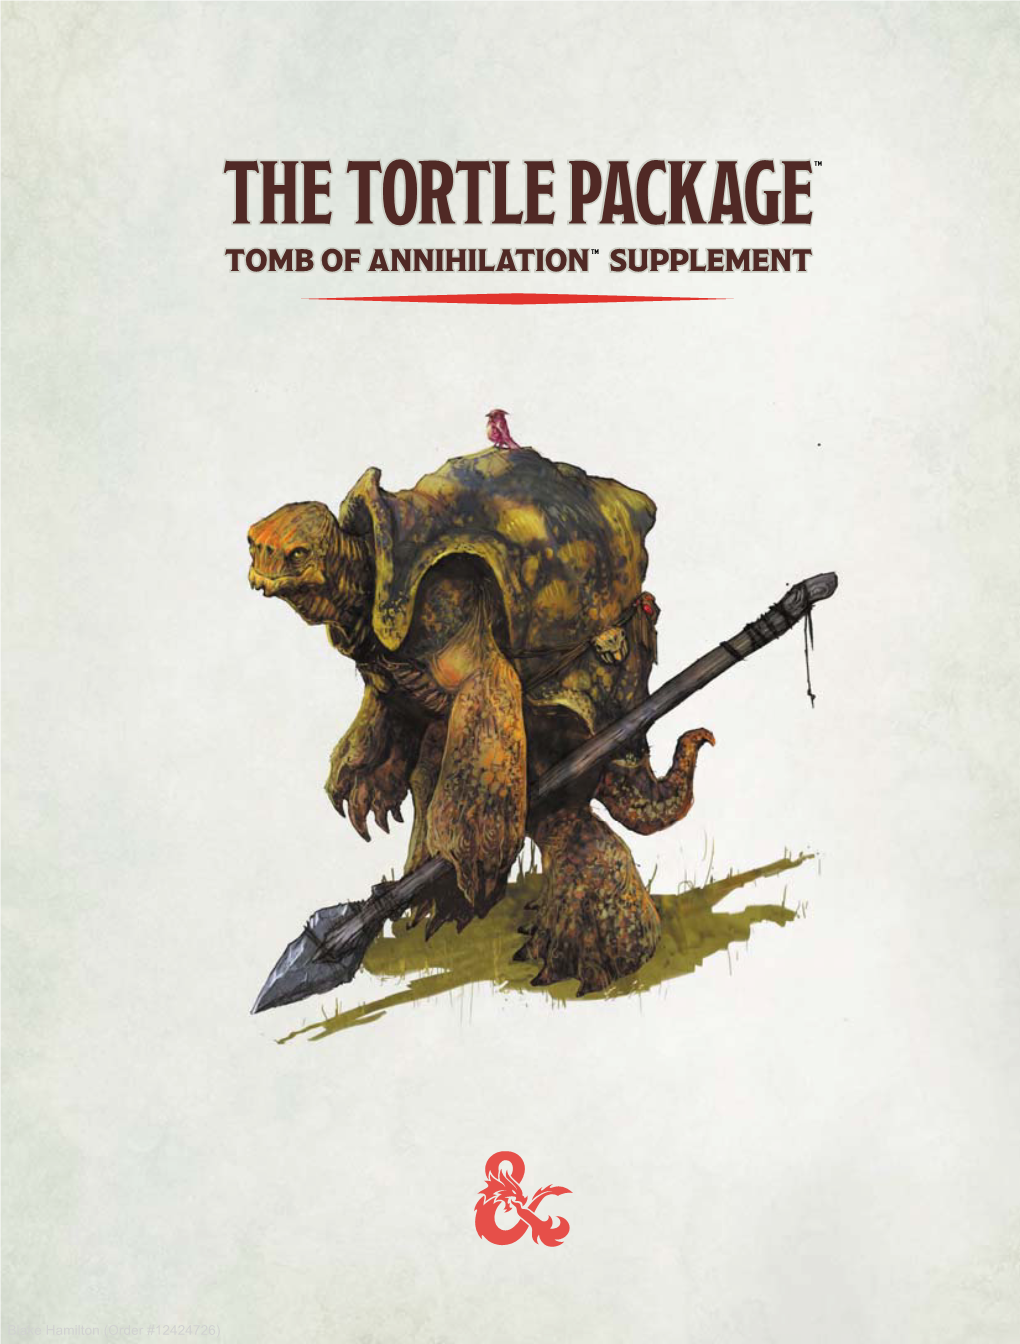 The Tortle Package™ Tomb of Annihilation ™ Supplement